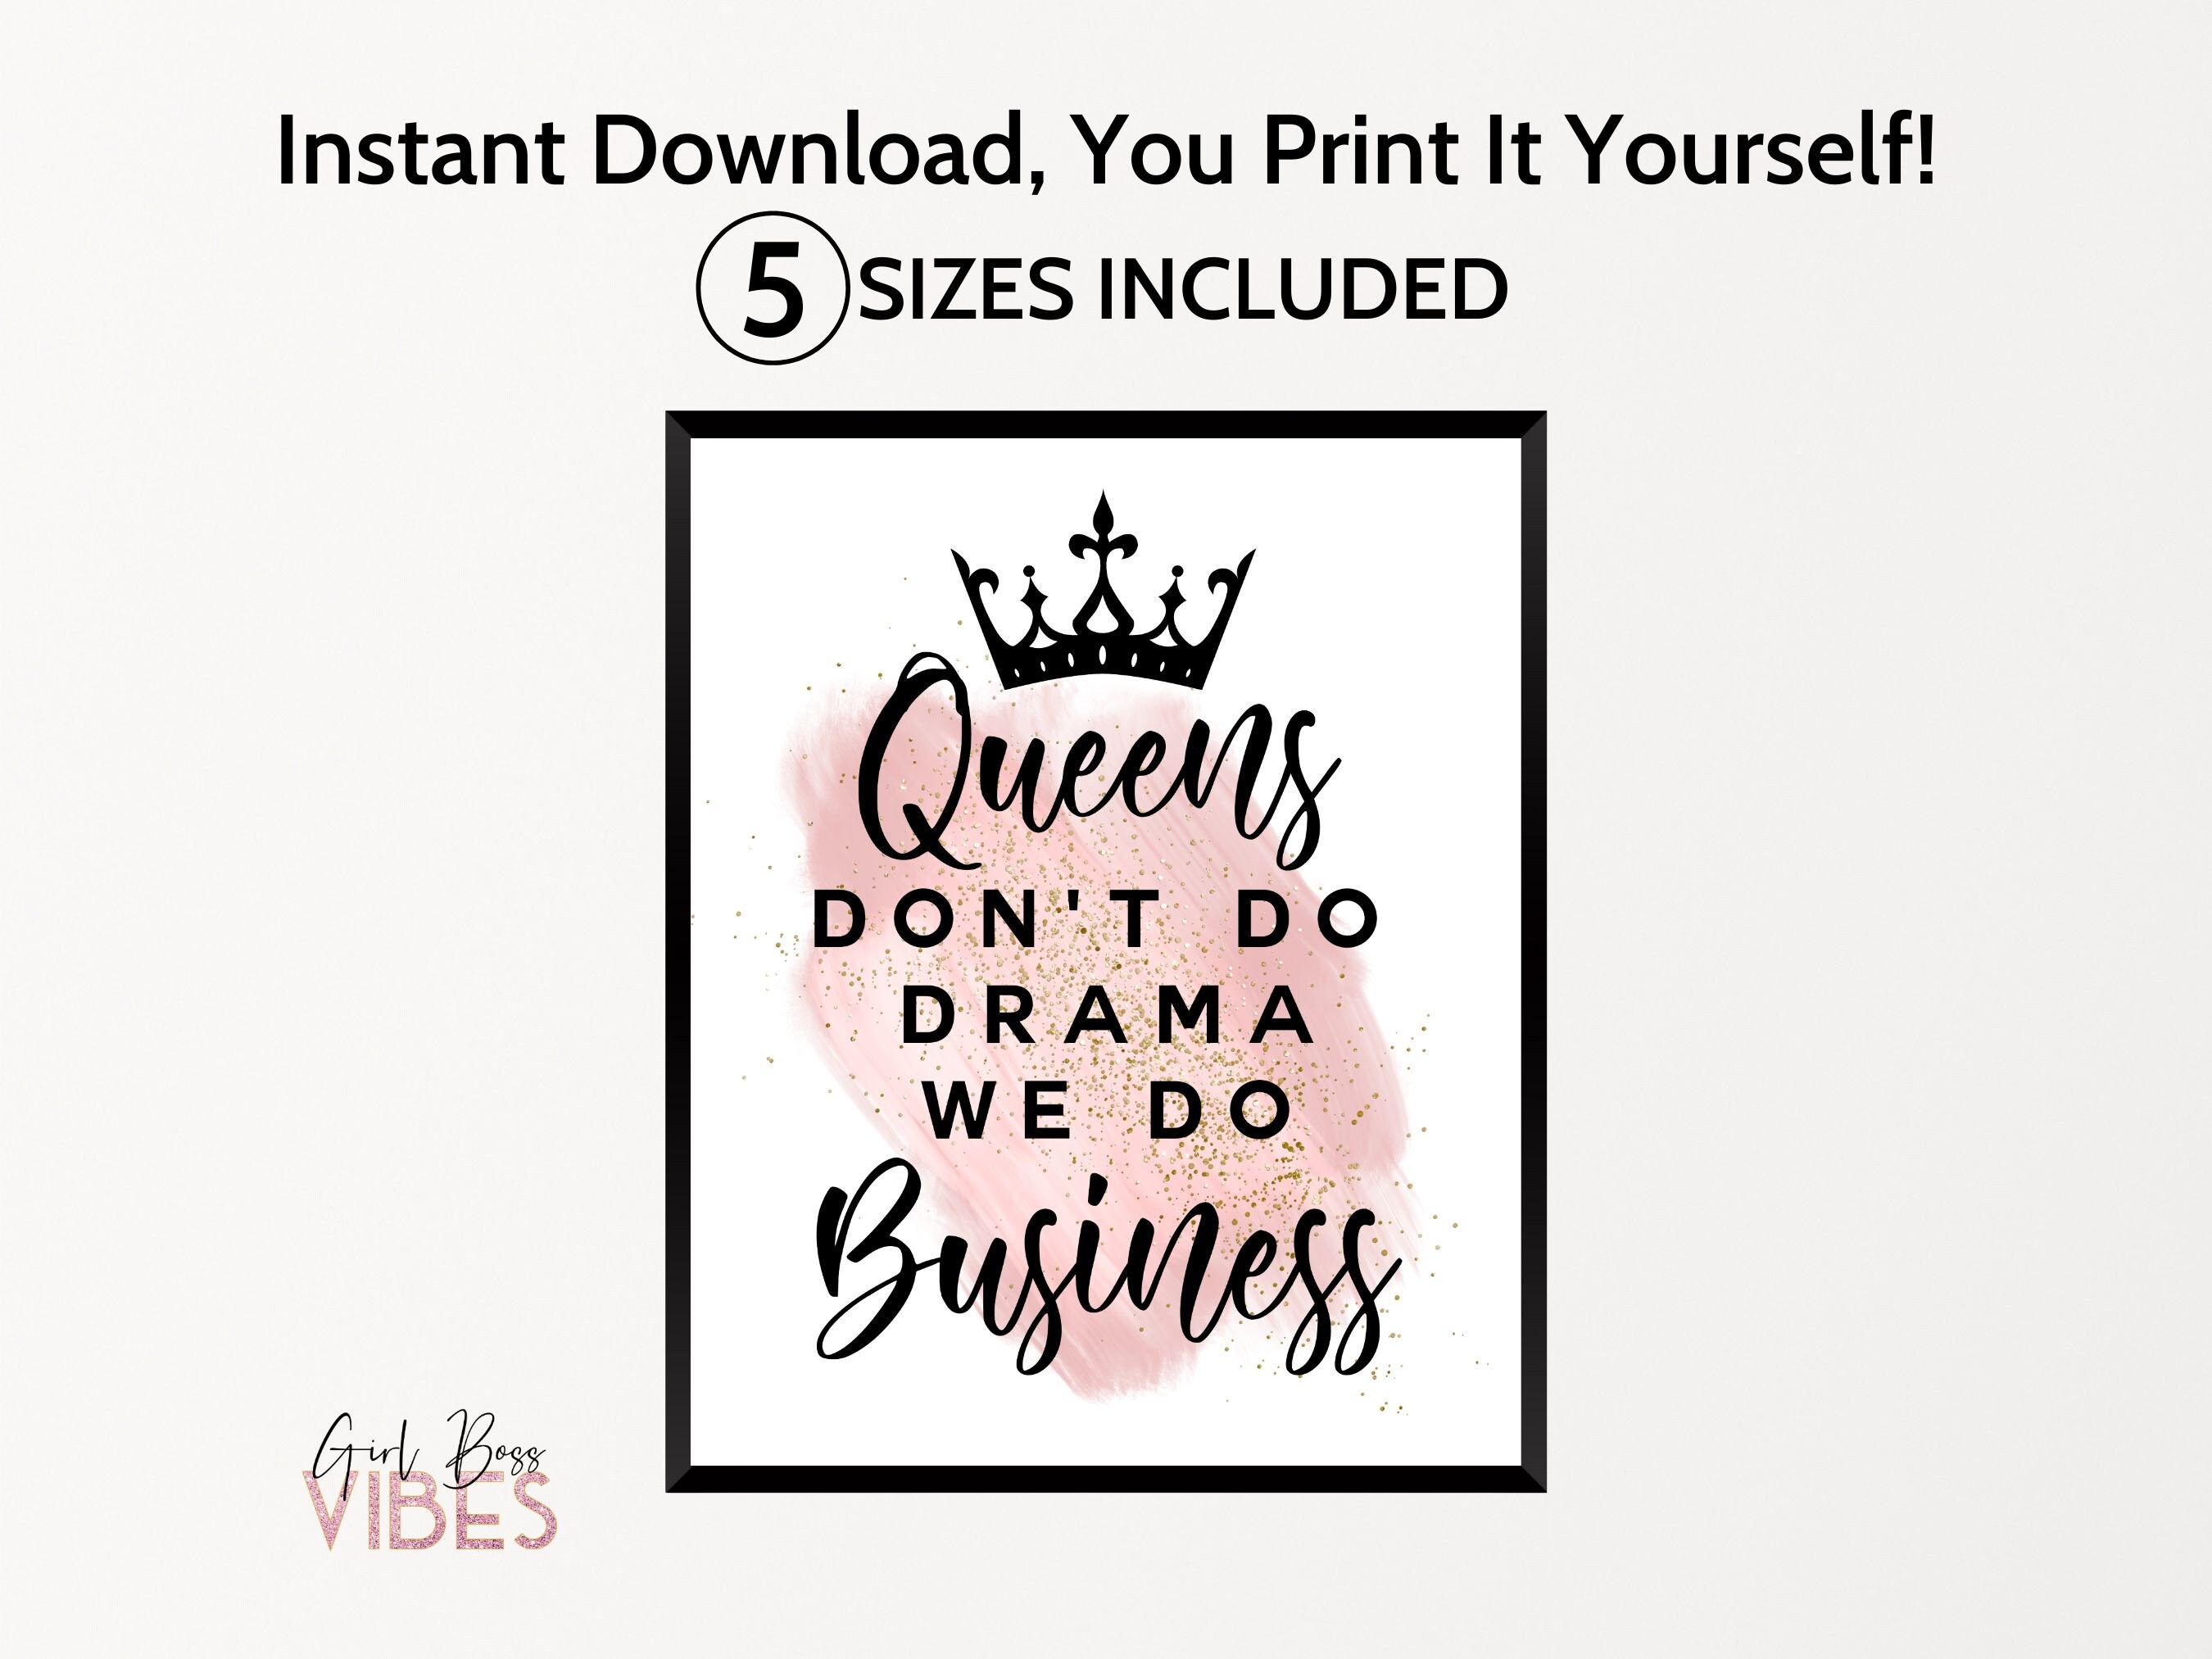 Queens Don't Do Drama We Do Business - Valentine's Day - Cute Valentine -  Queens - Entrepreneur - Small Business Owner - Funny Gifts For Women  Poster for Sale by amSIMO